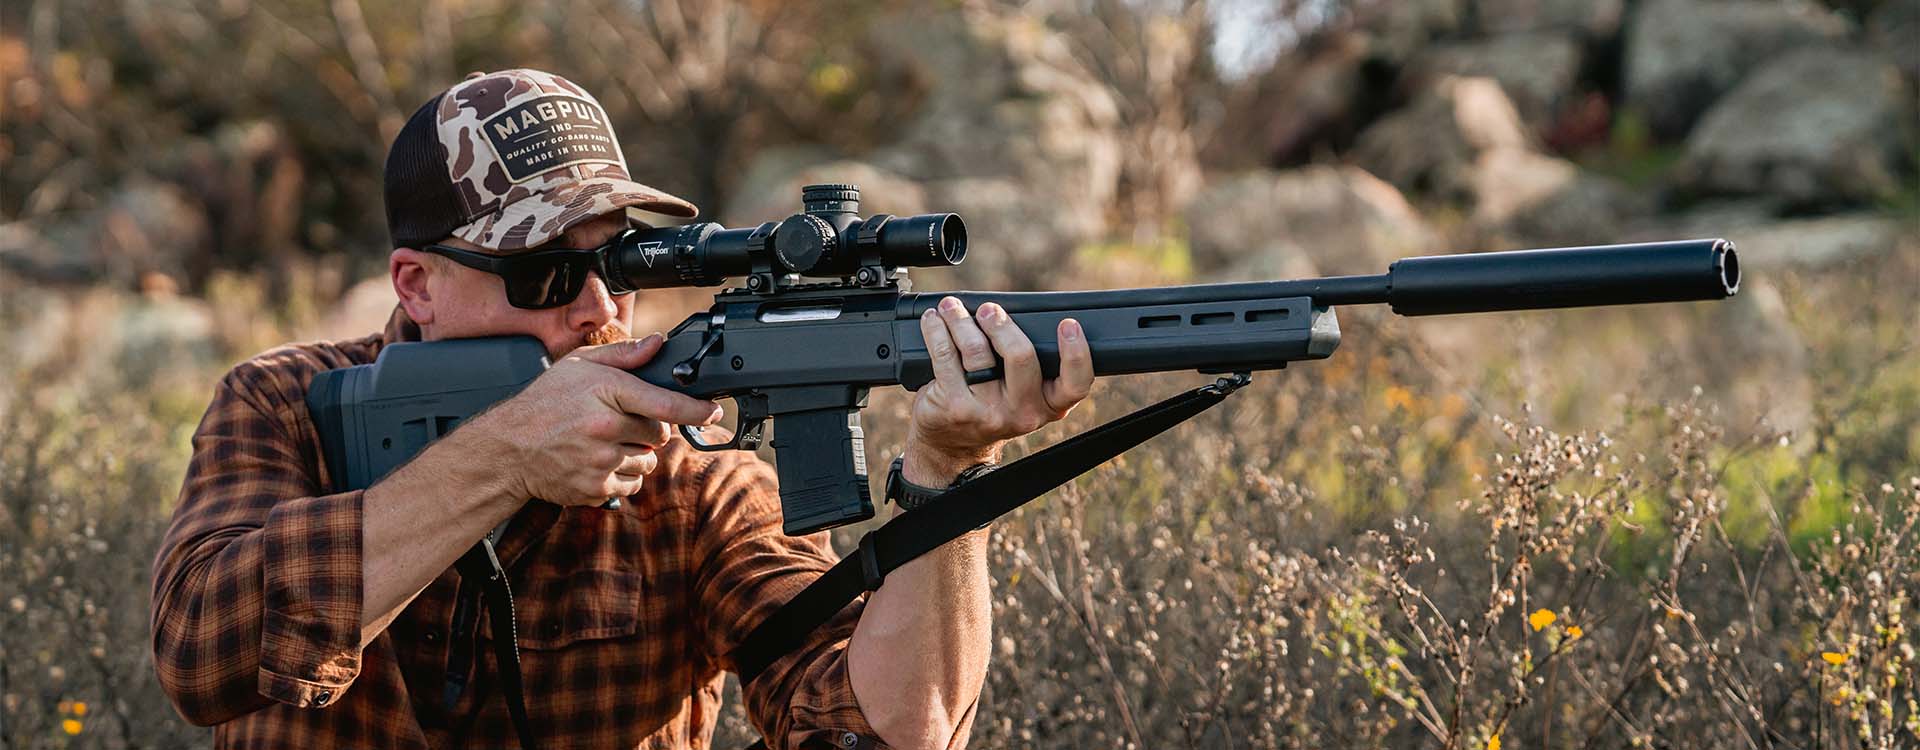 The Magpul Hunter stock is on sale this black friday.